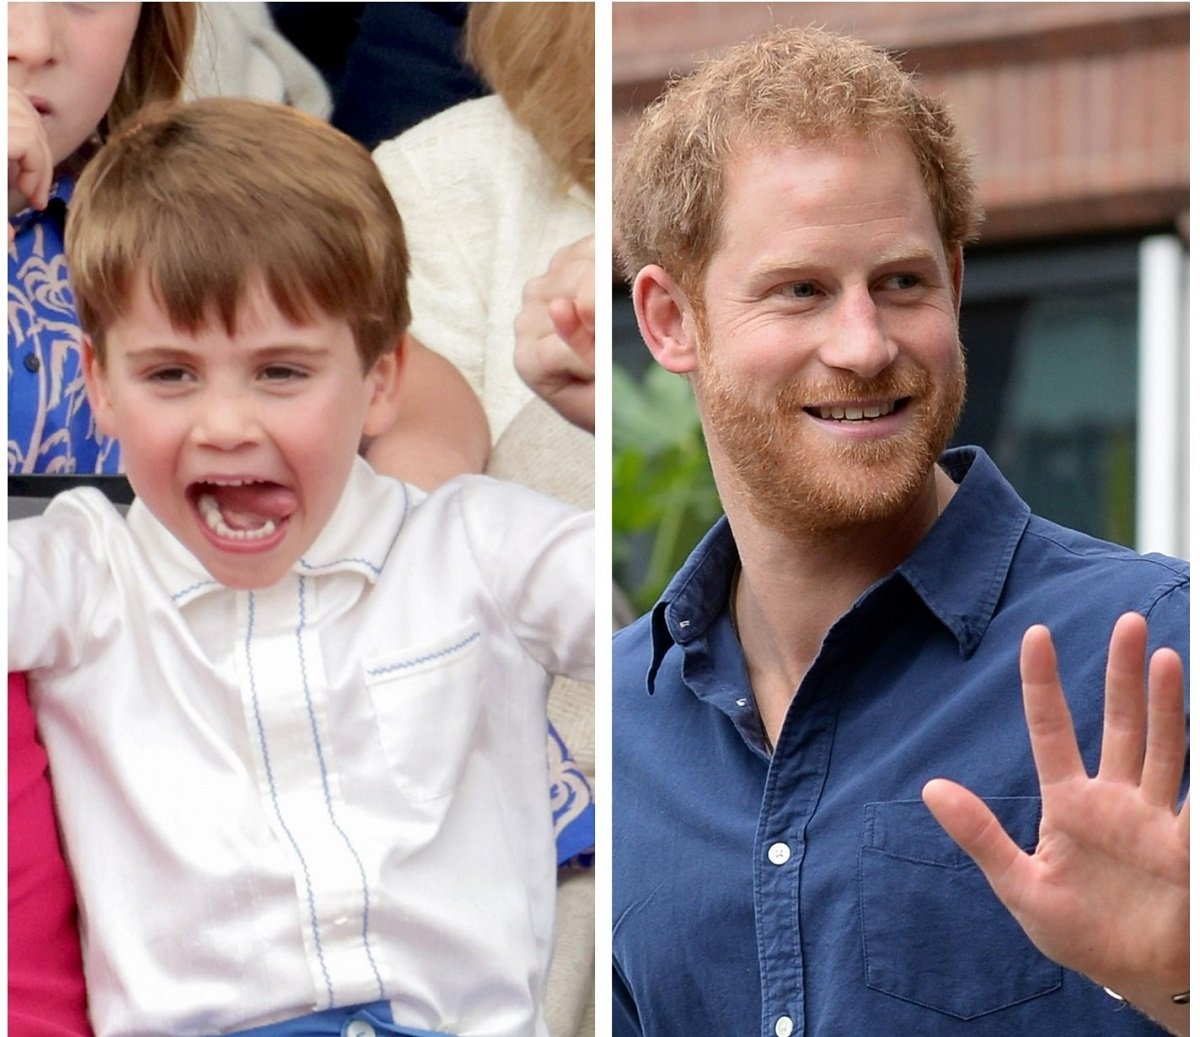 (L) Prince Louis at the Platium Pageant, (R) Prince Harry waving as he leaves Nottingham police station